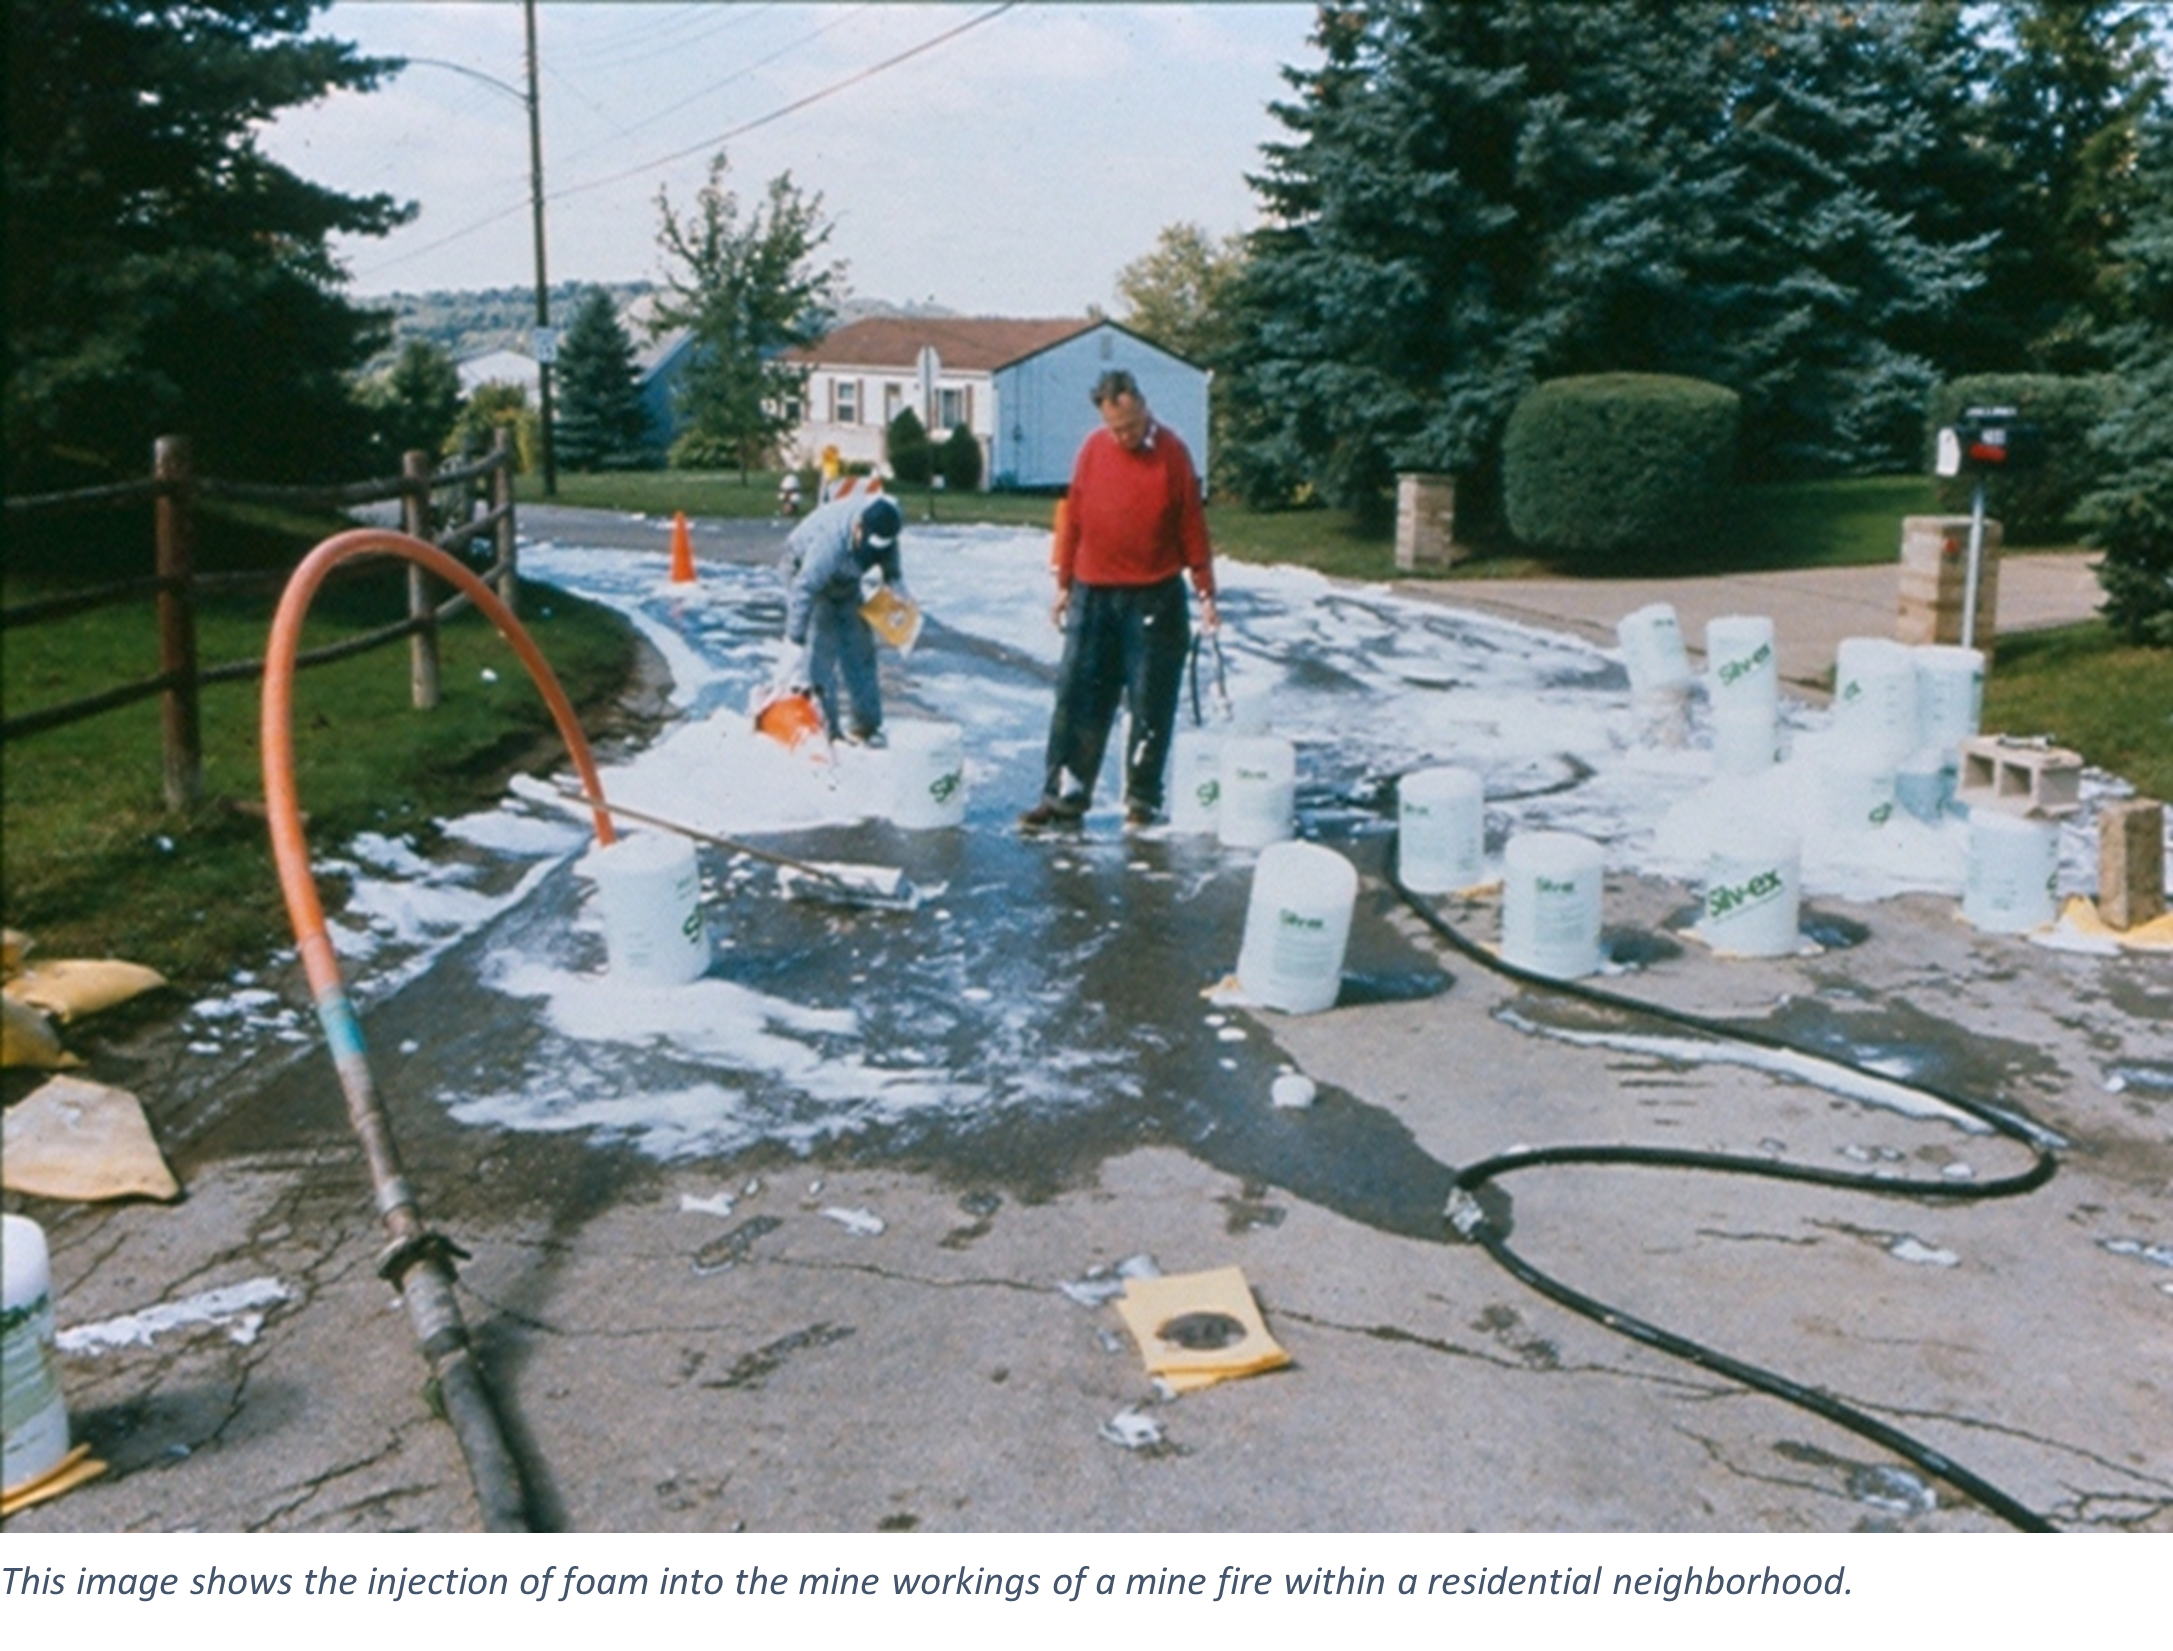 This image shows the injection of foam into the mine workings of a mine fire within a residential neighborhood.